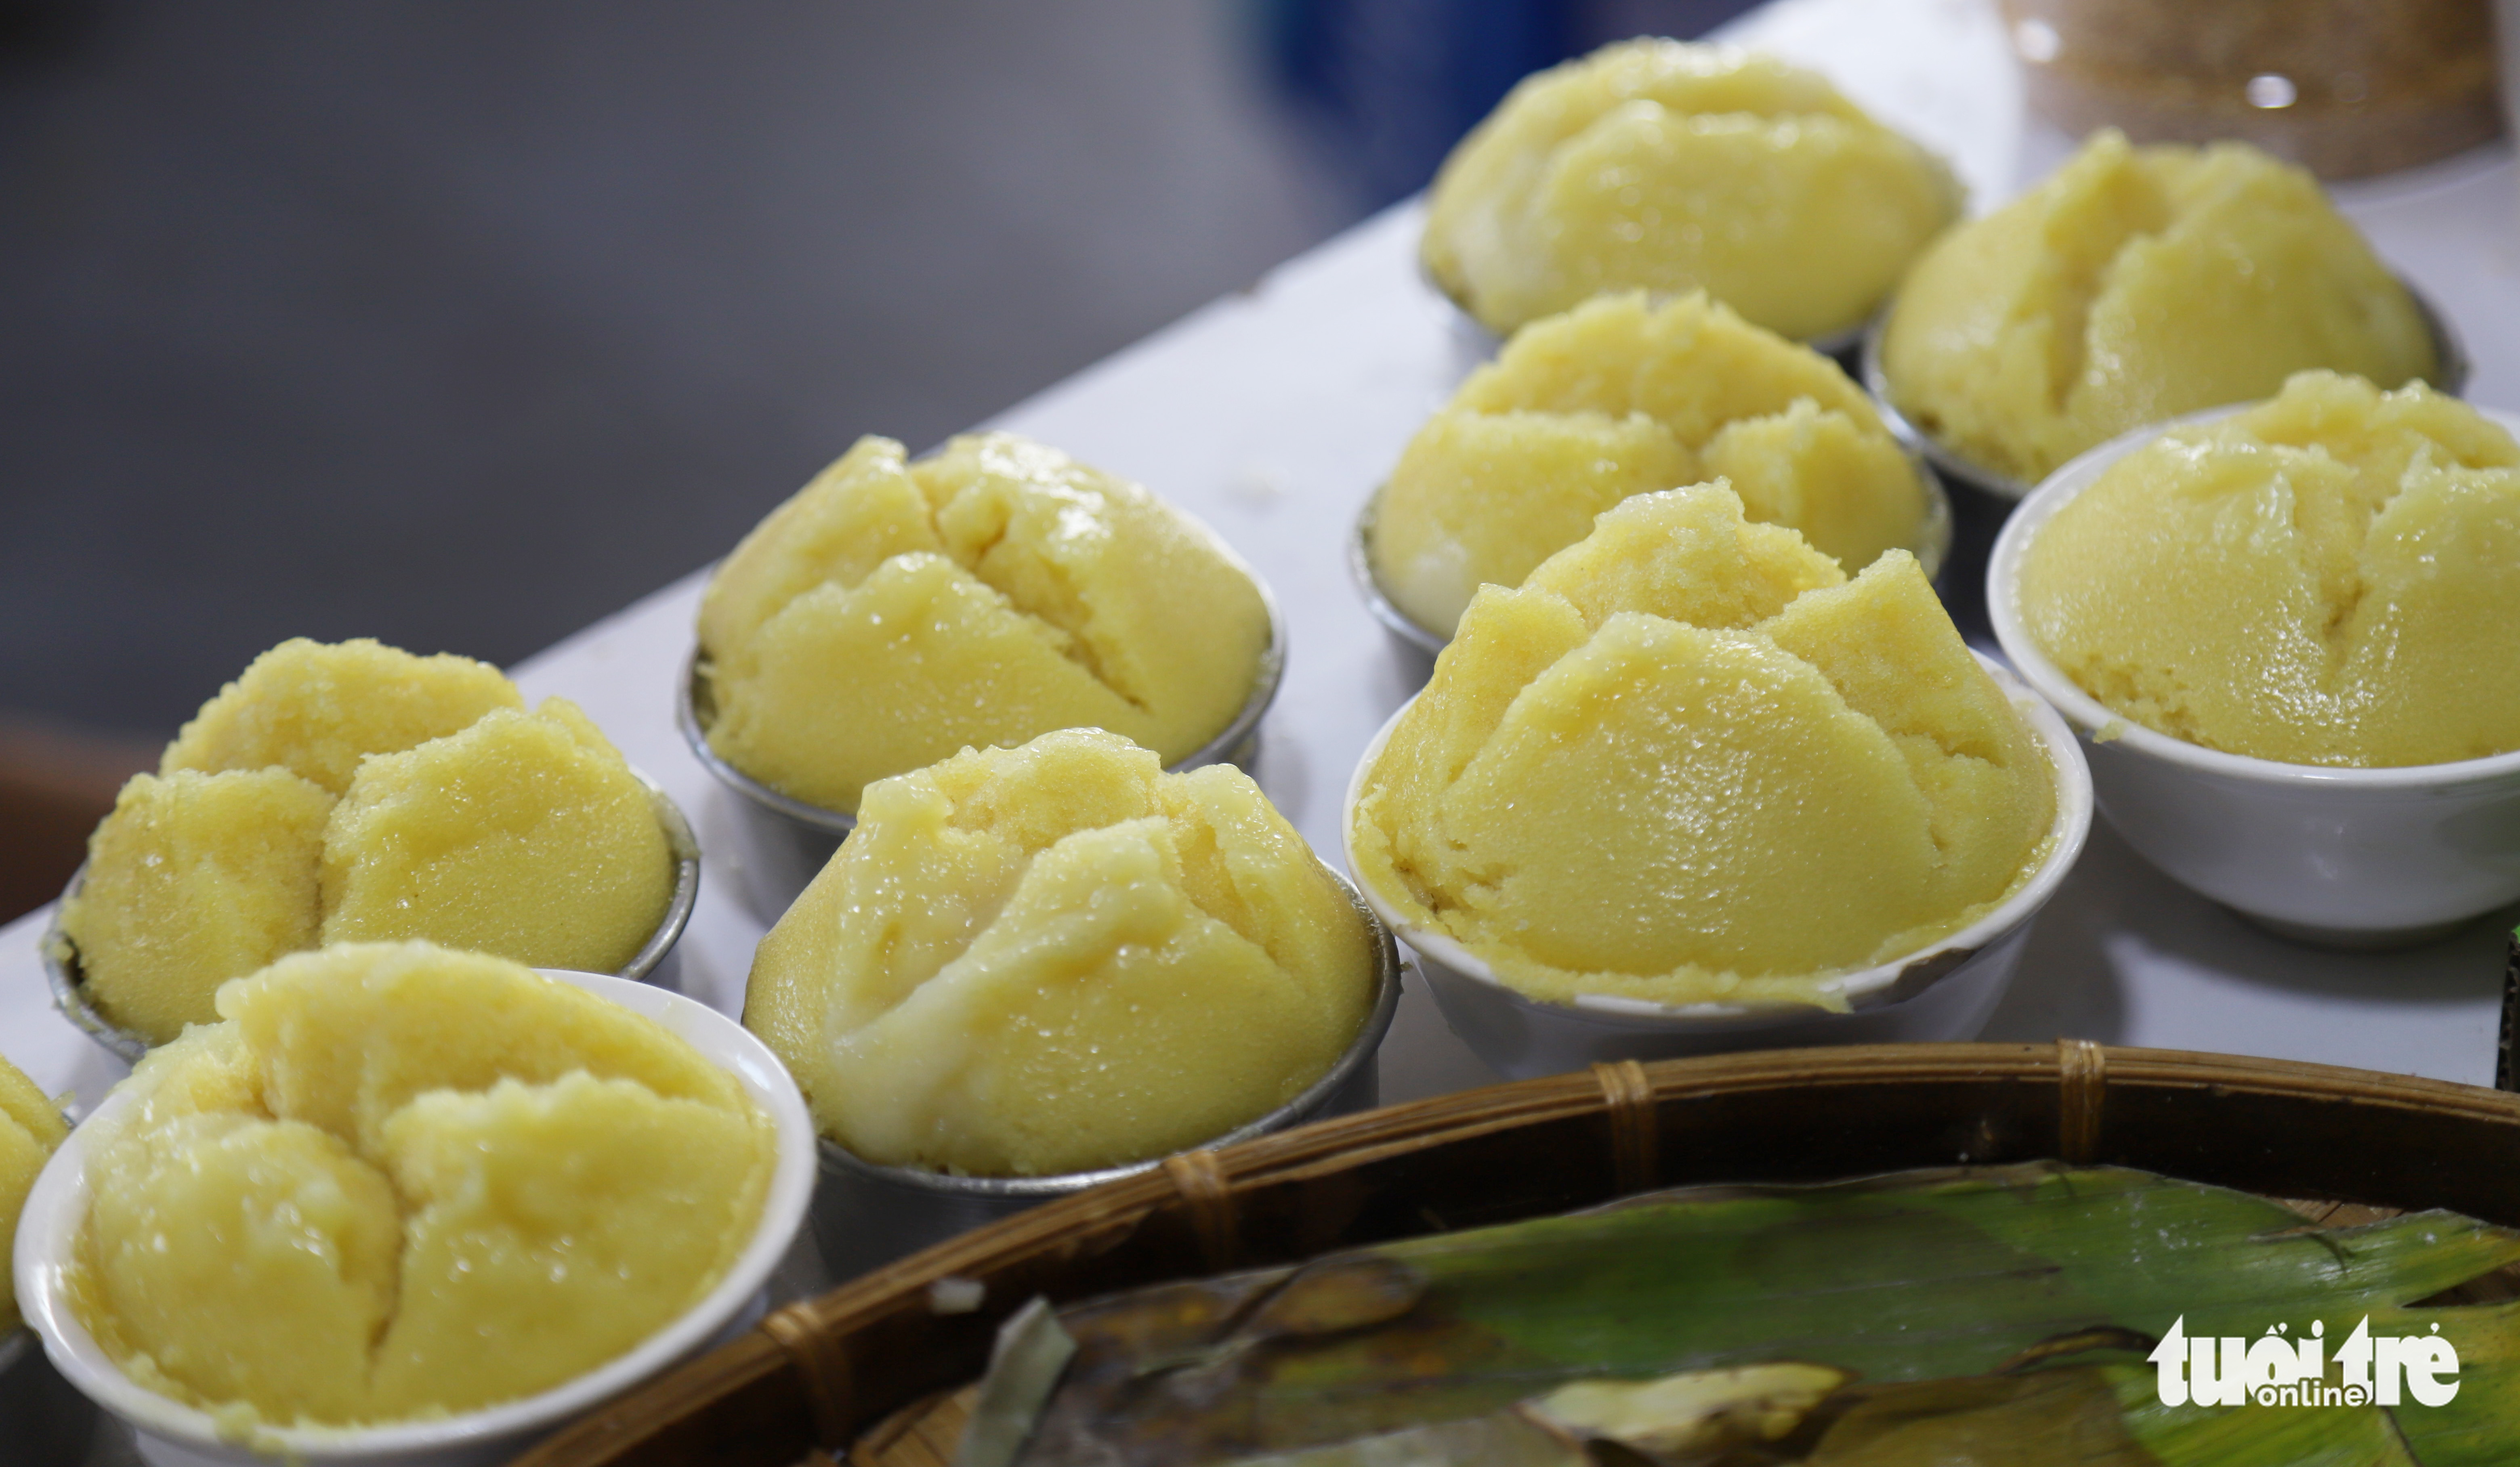 'Banh bo thot not' (steamed palm sugar rice cake) are displayed at the Traditional Southern Cake Festival in Can Tho City, Vietnam, April 7, 2022. Photo: Chi Quoc / Tuoi Tre